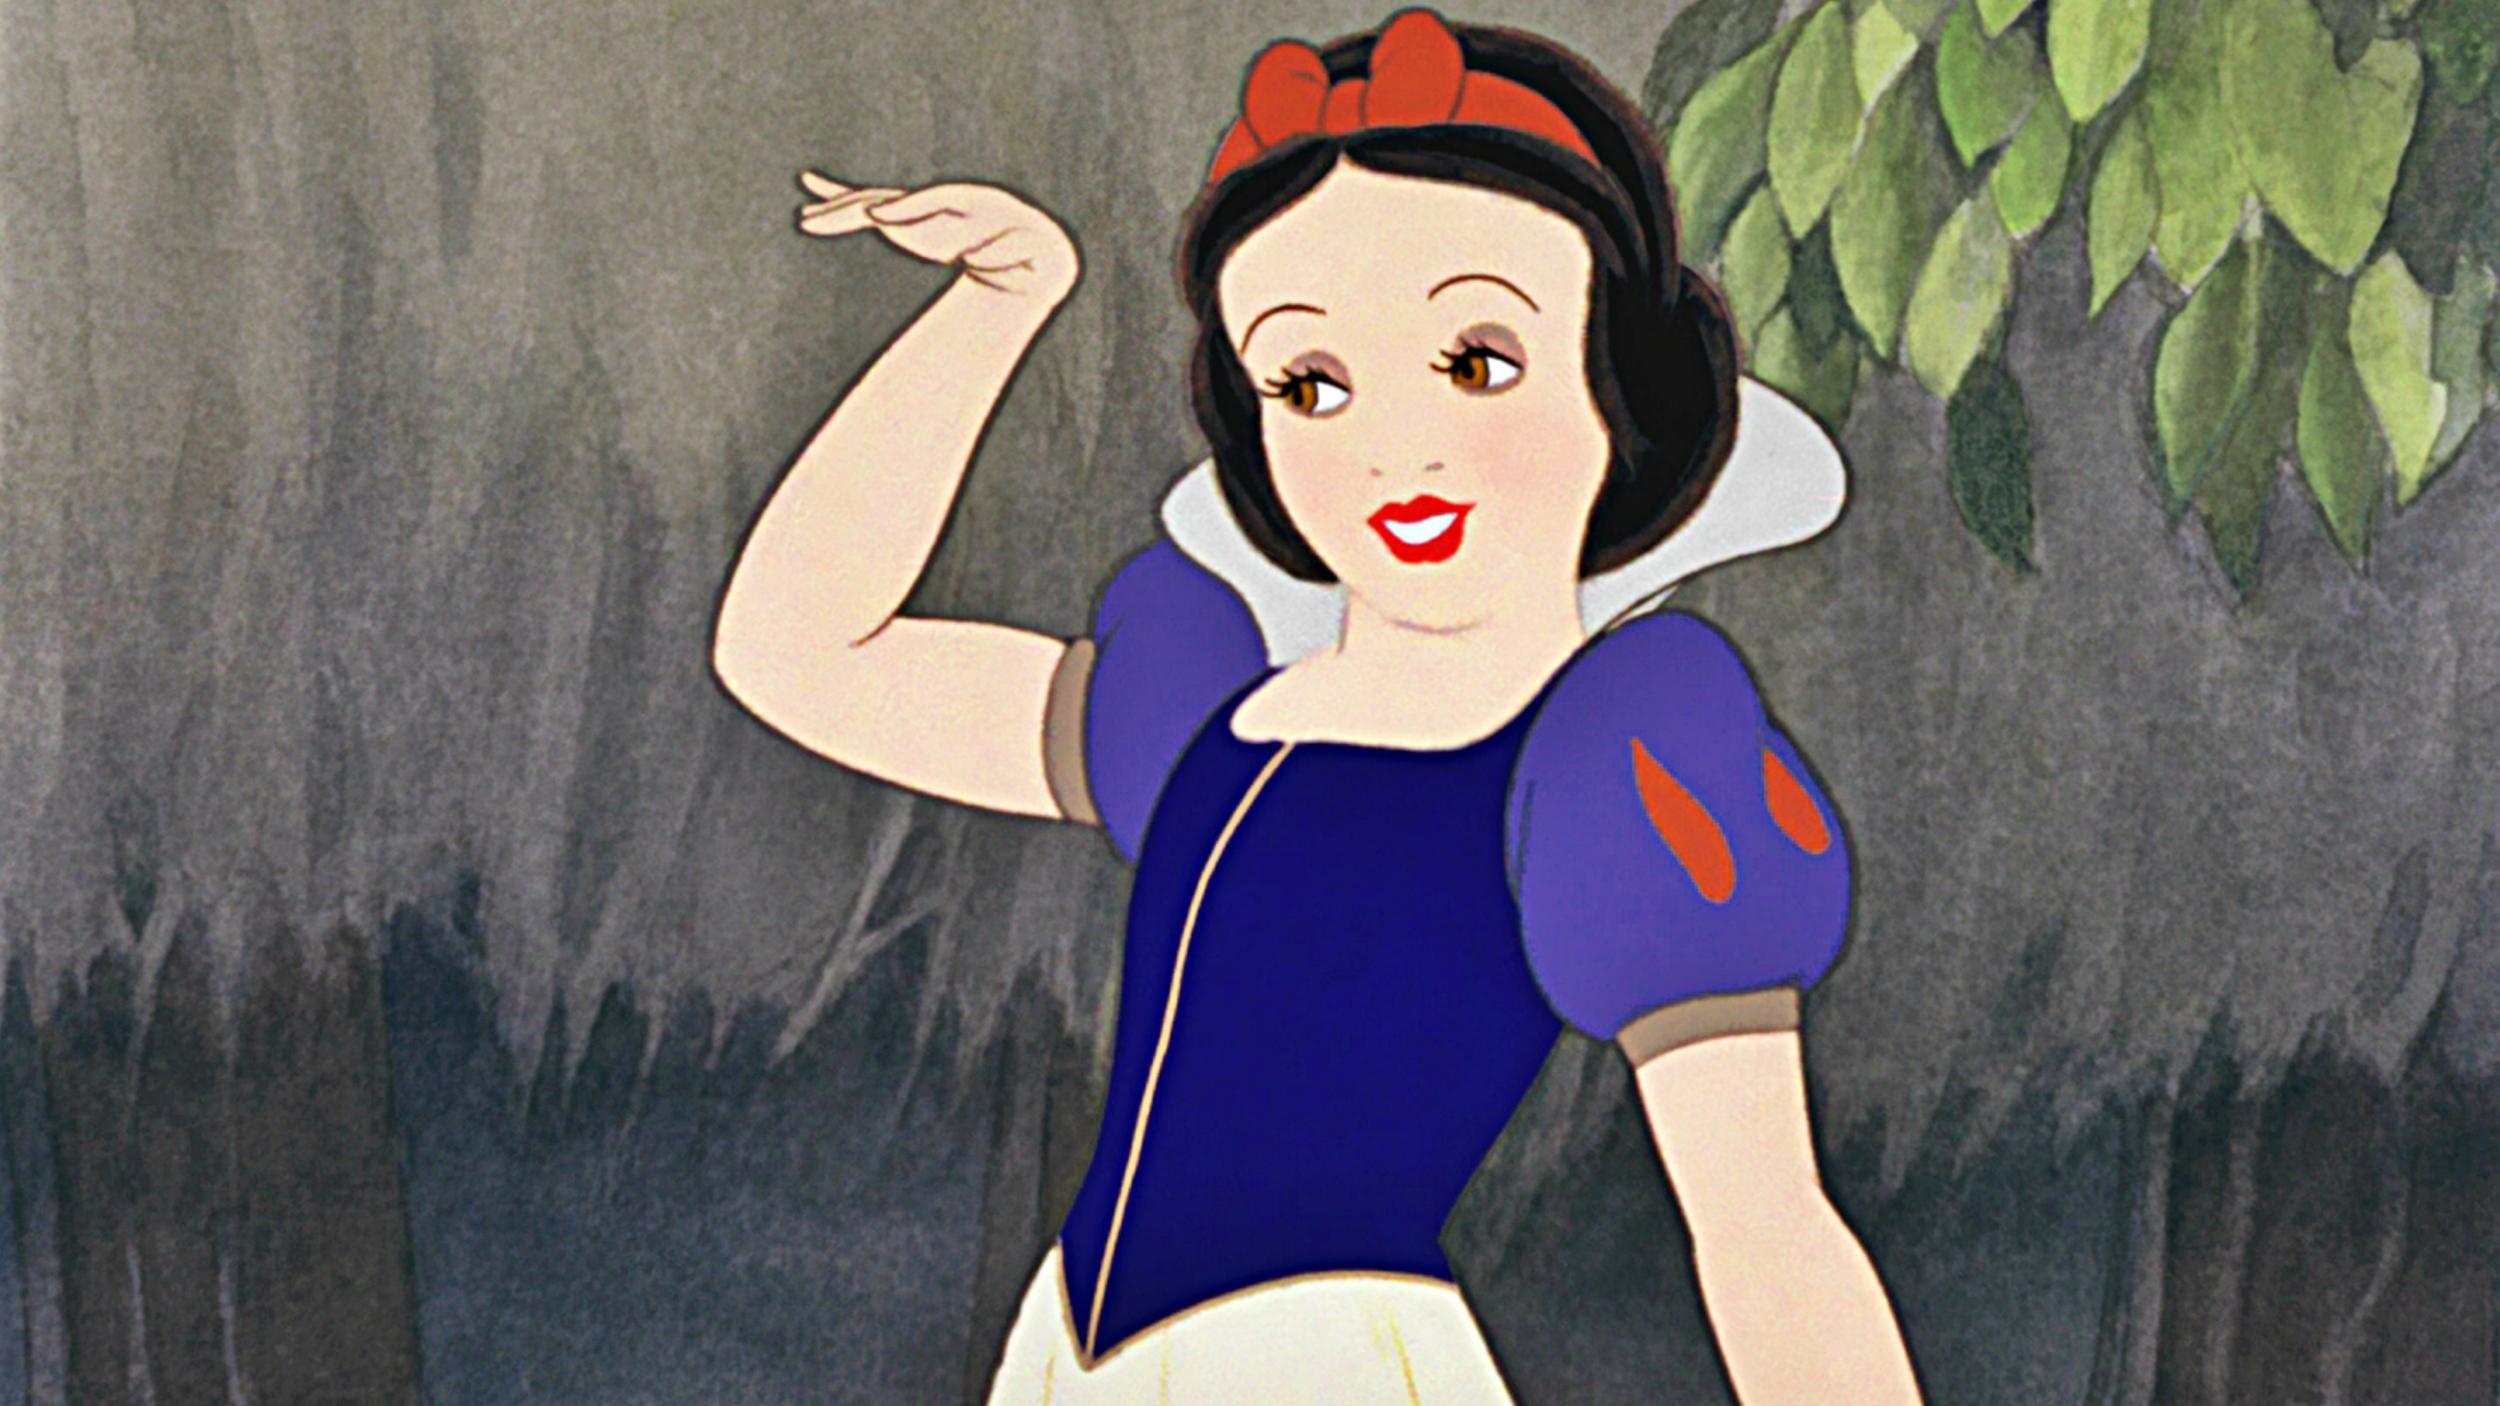 Disney now developing live-action Snow White | The Independent